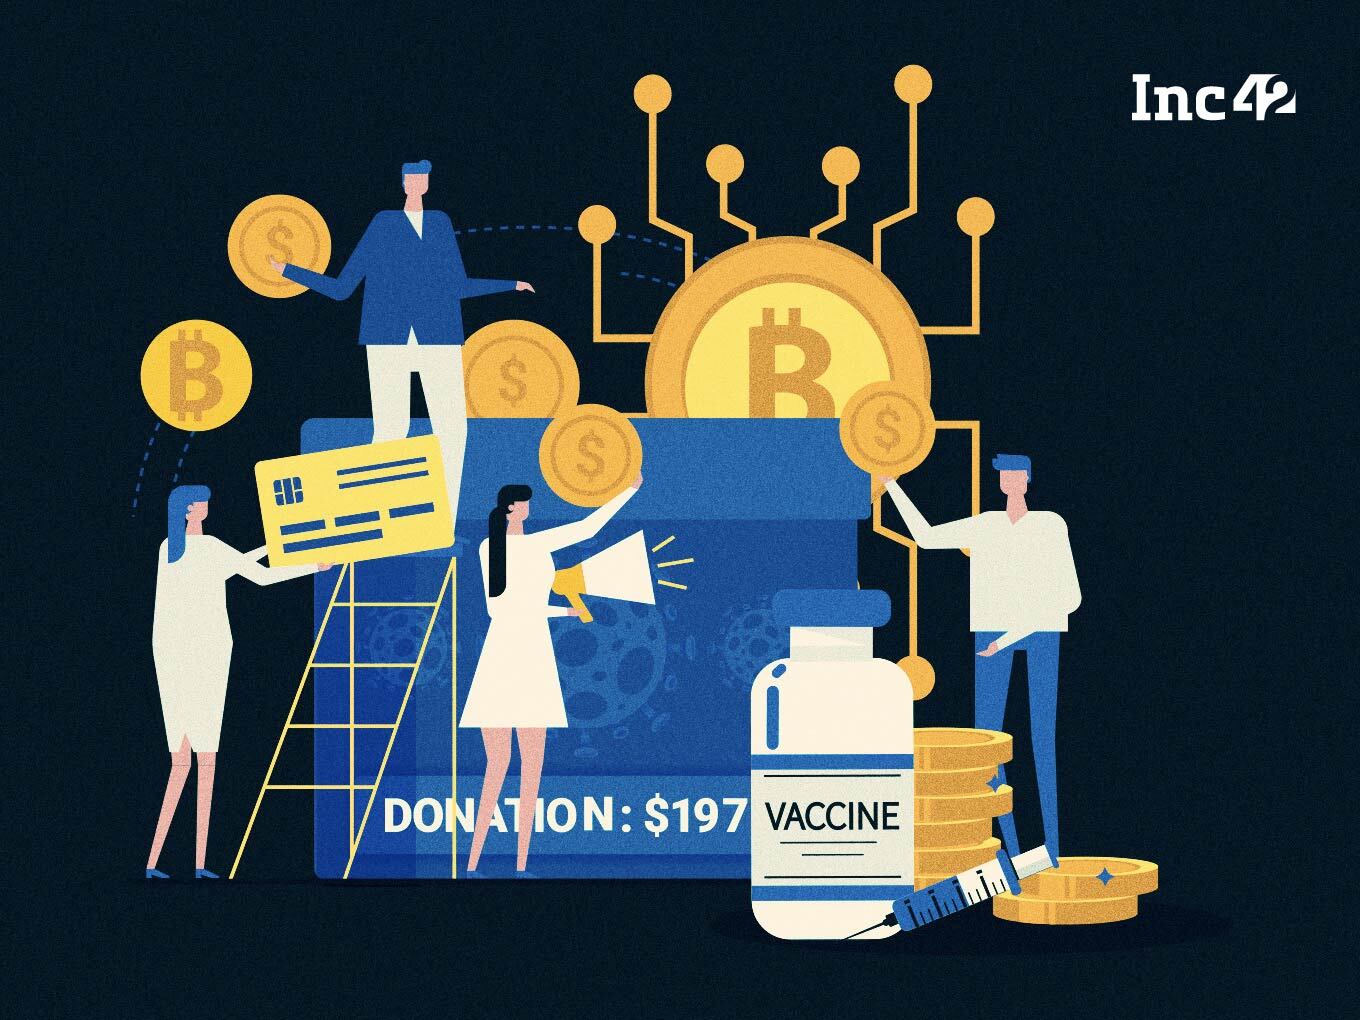 #StartupsVsCovid19: Indian Crypto Founder Attracts $2.5 Mn From Global Crypto Community To Back Youth Vaccination